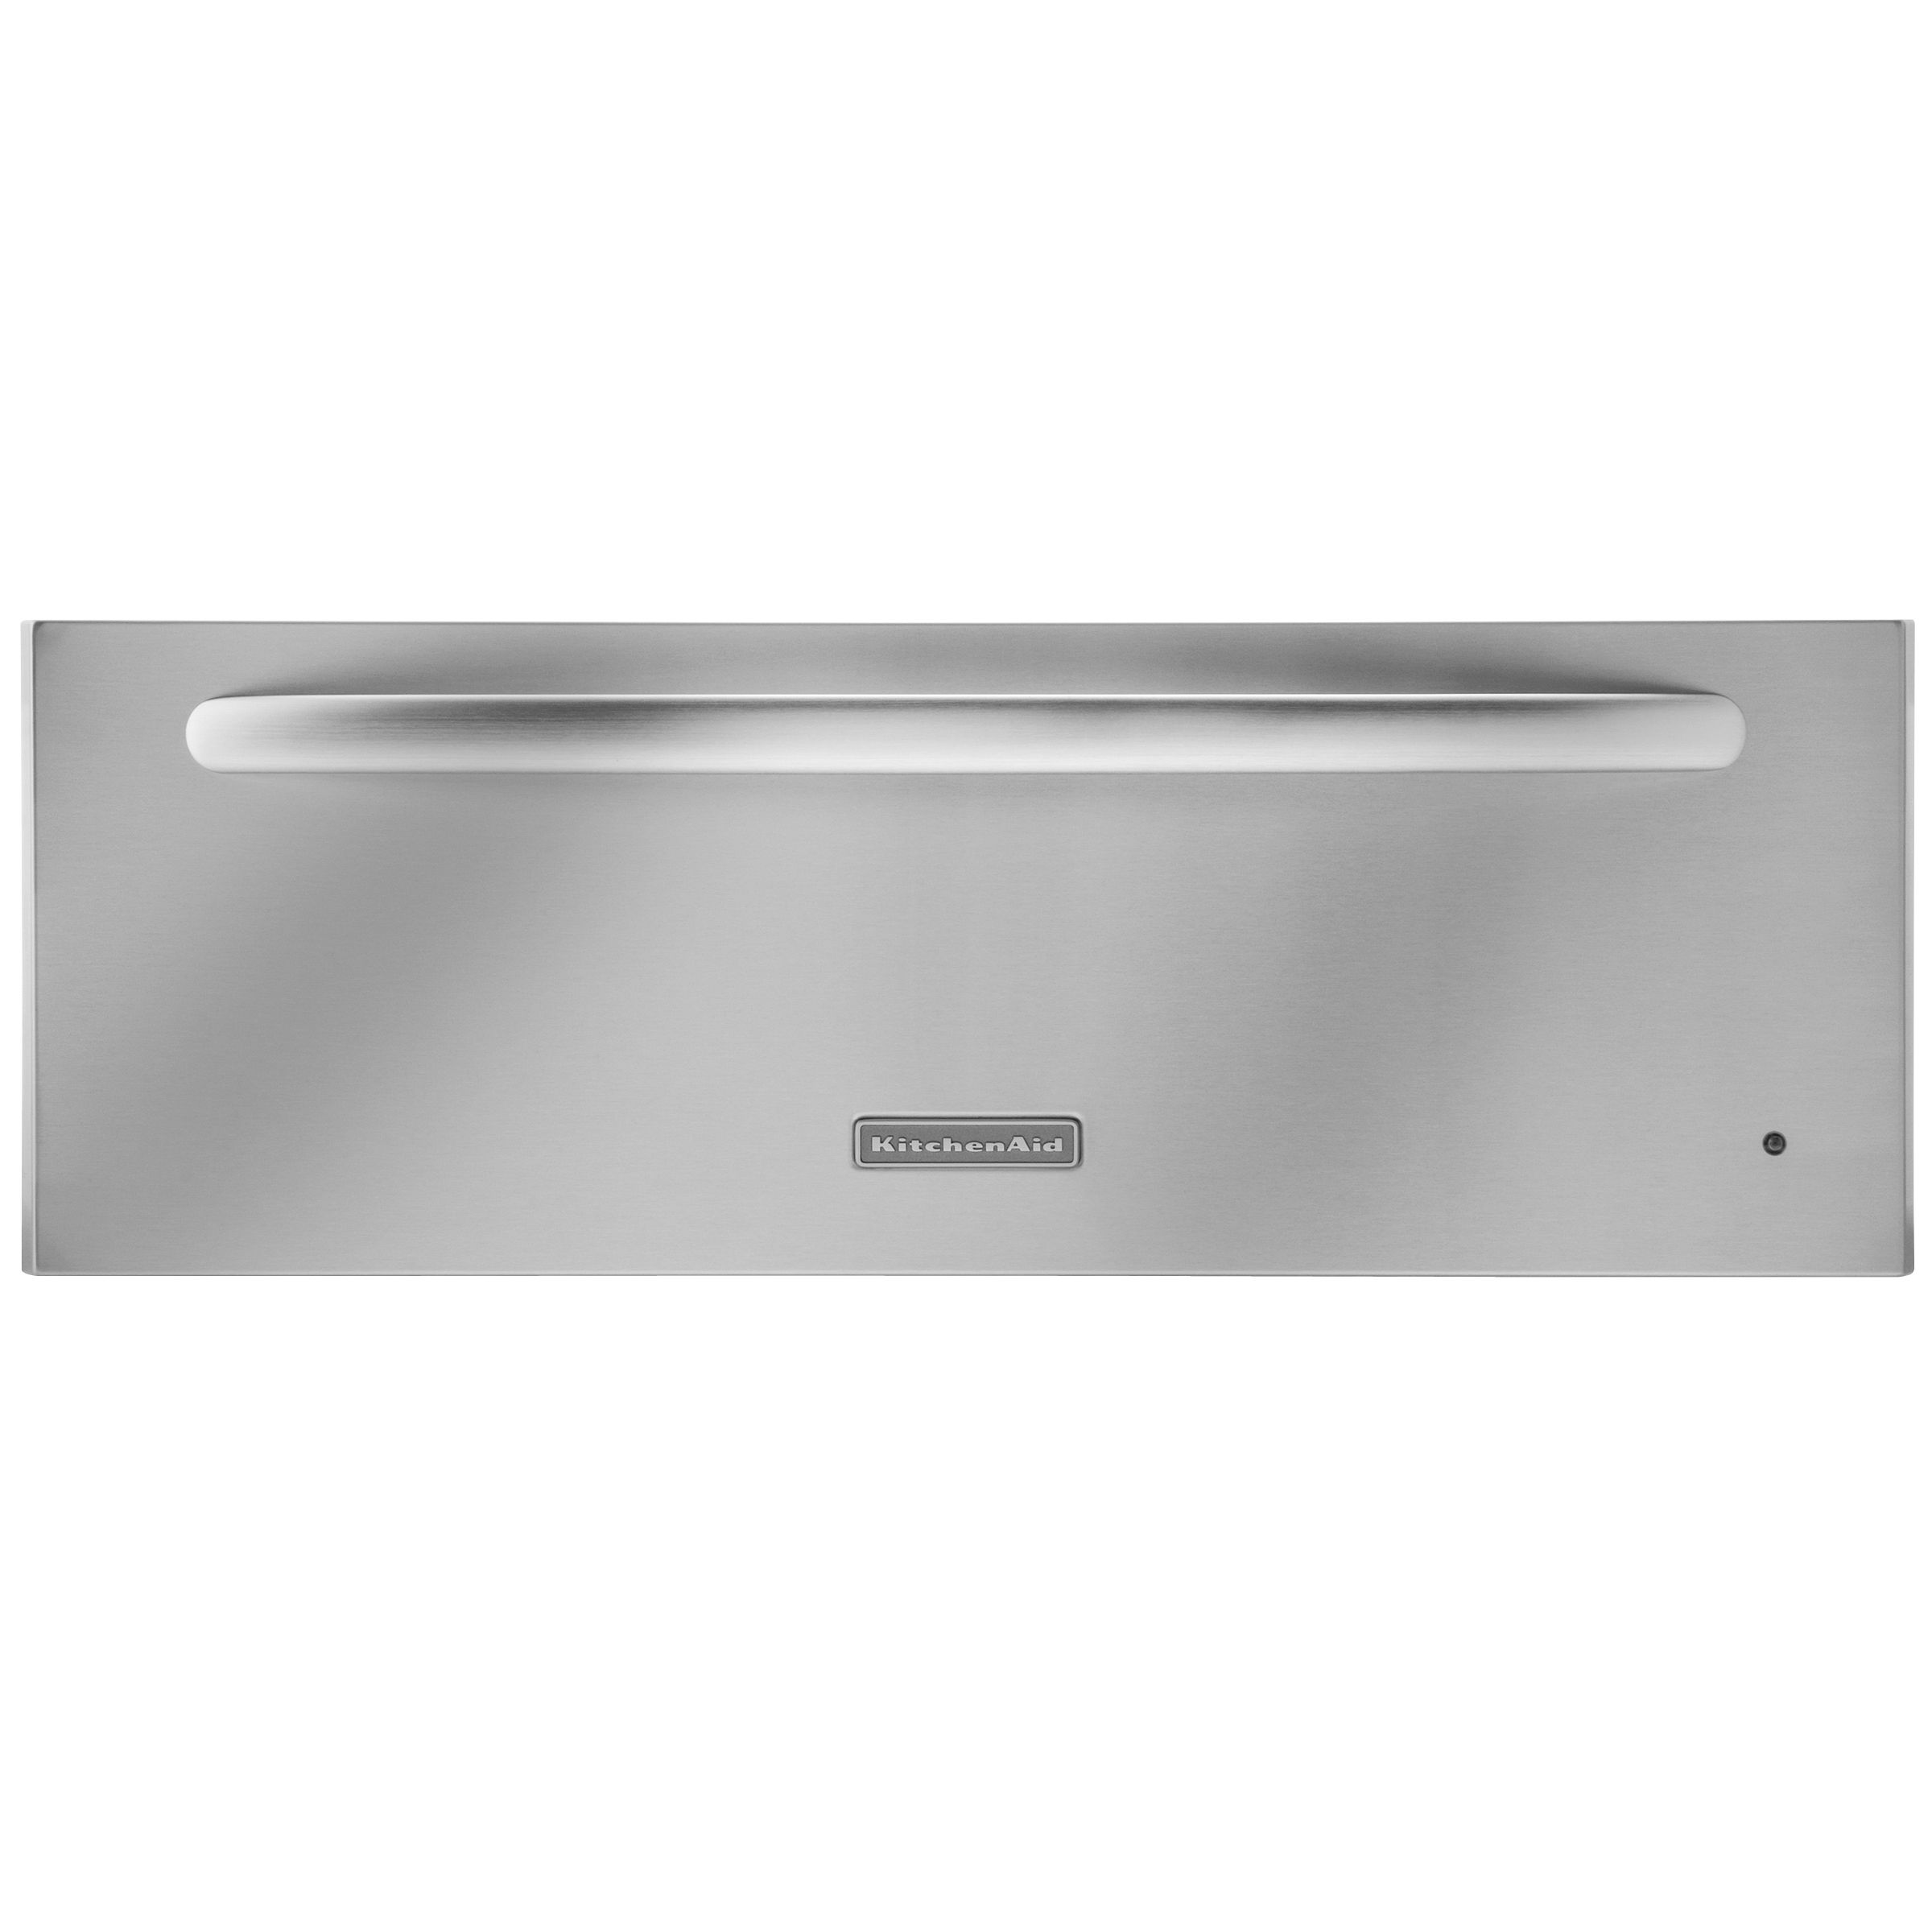 KitchenAid 24 Slow-Cook Warming Drawer Stainless Steel 2 position